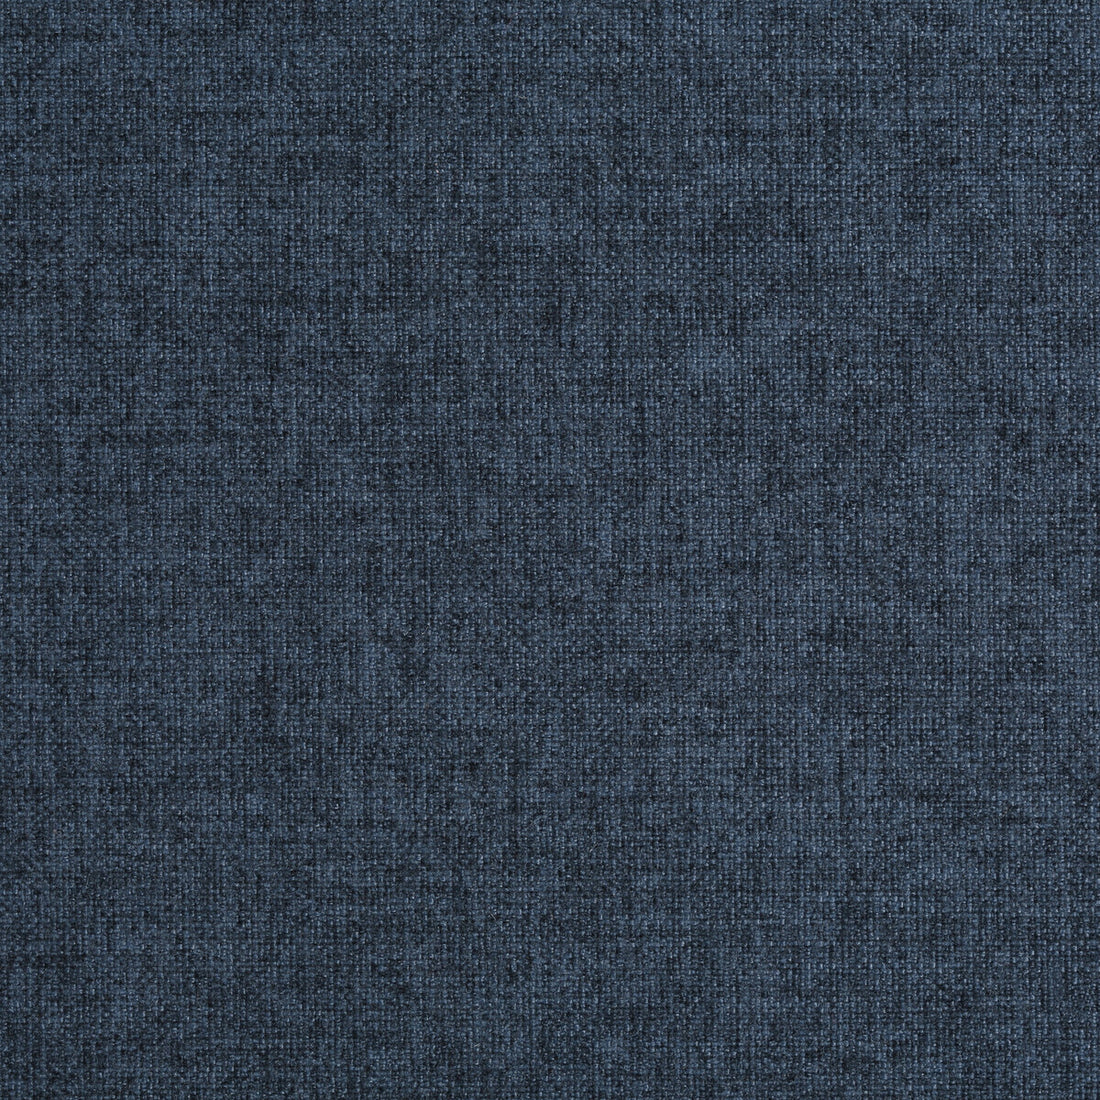 Kravet Contract fabric in 35122-5 color - pattern 35122.5.0 - by Kravet Contract in the Crypton Incase collection